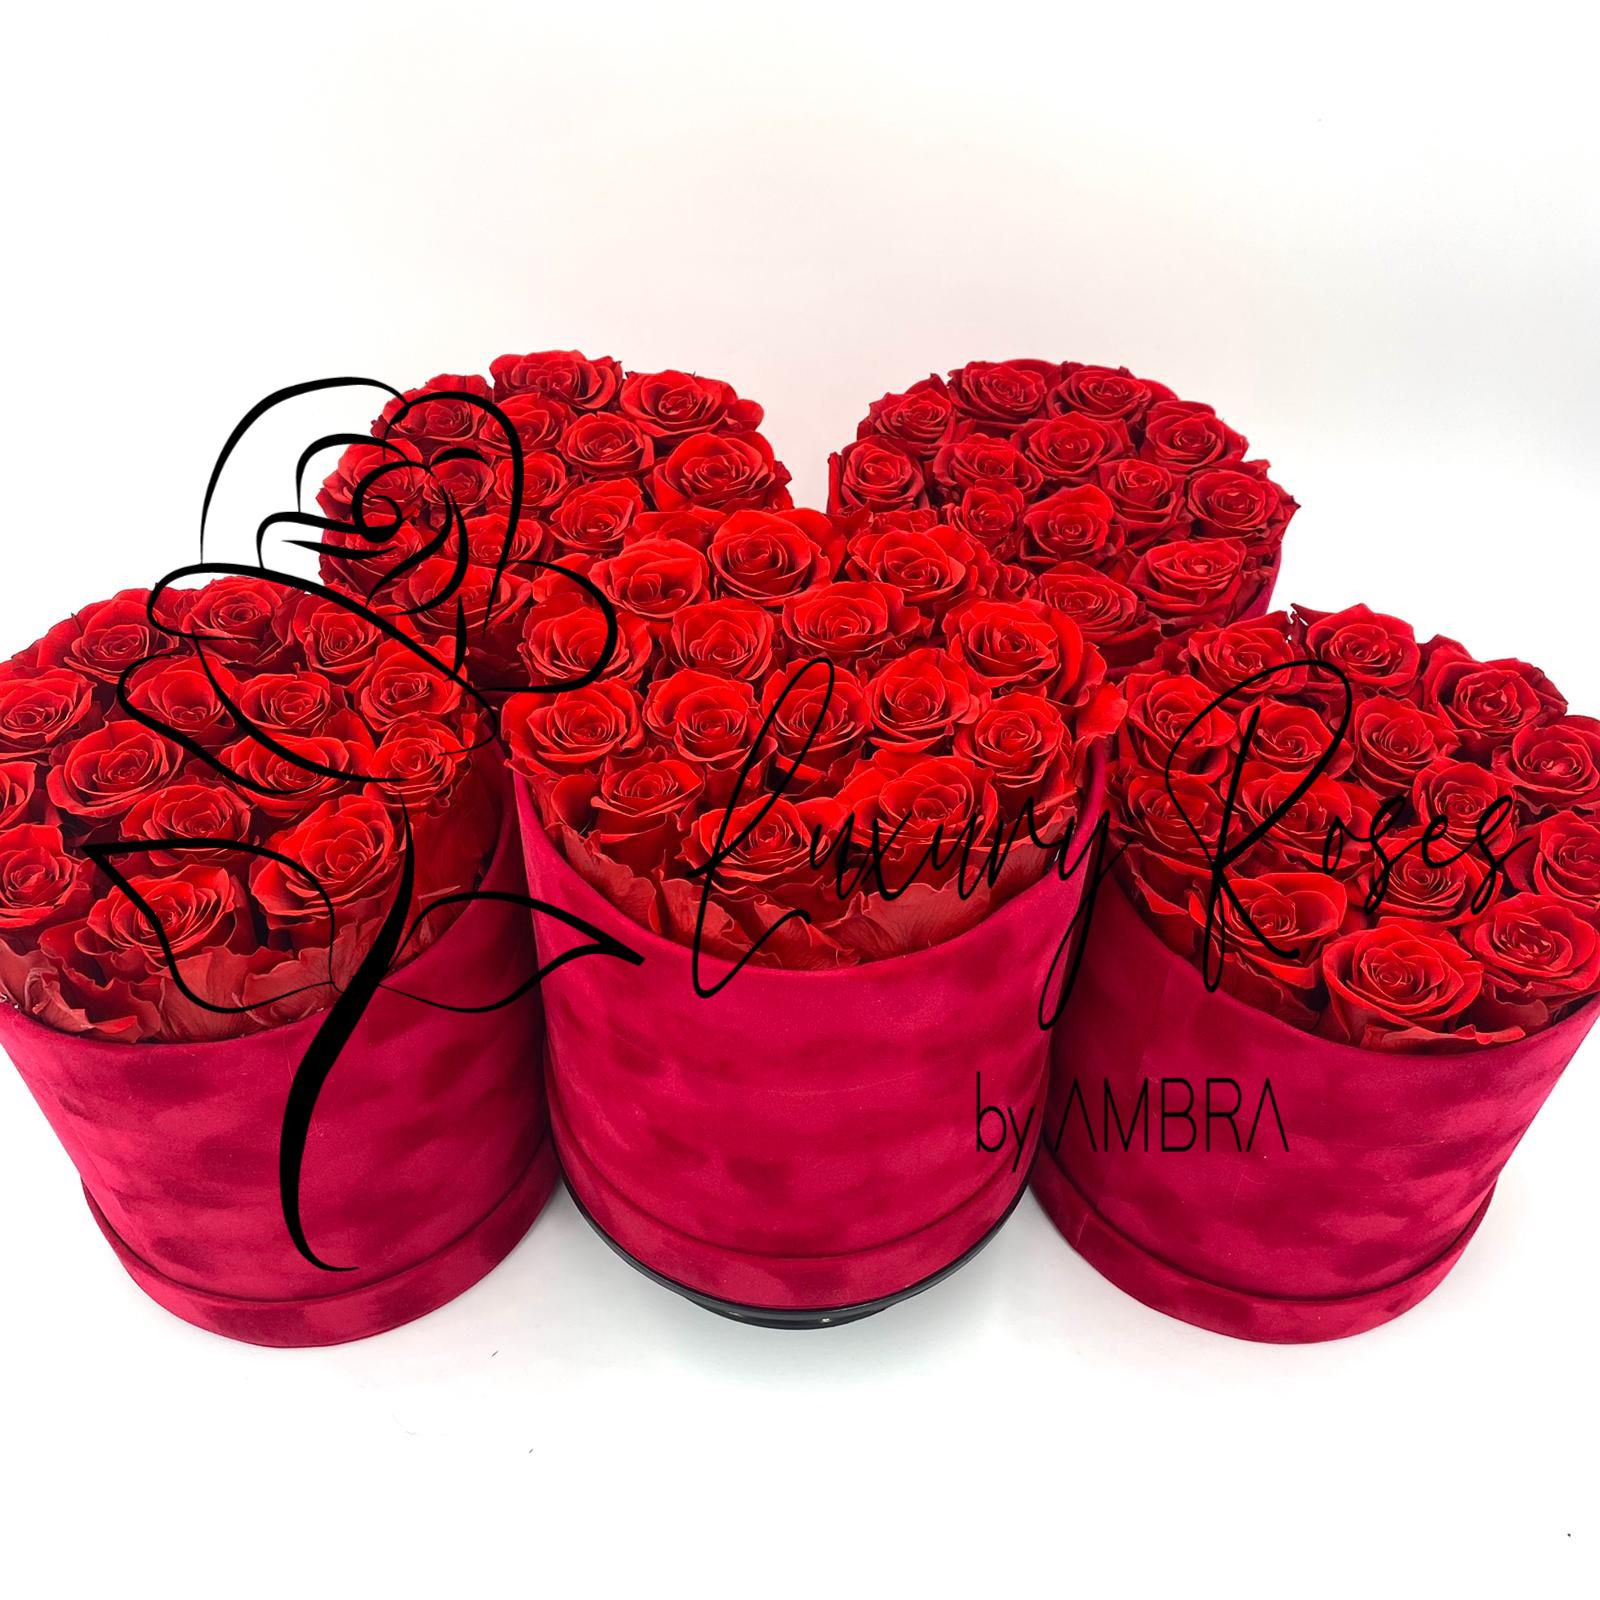 Red roses red velvet Box Eternal Box Roses bucket bouquet Gift Real Preserved Flowers Anniversary Birthday Present Luxury immortal roses